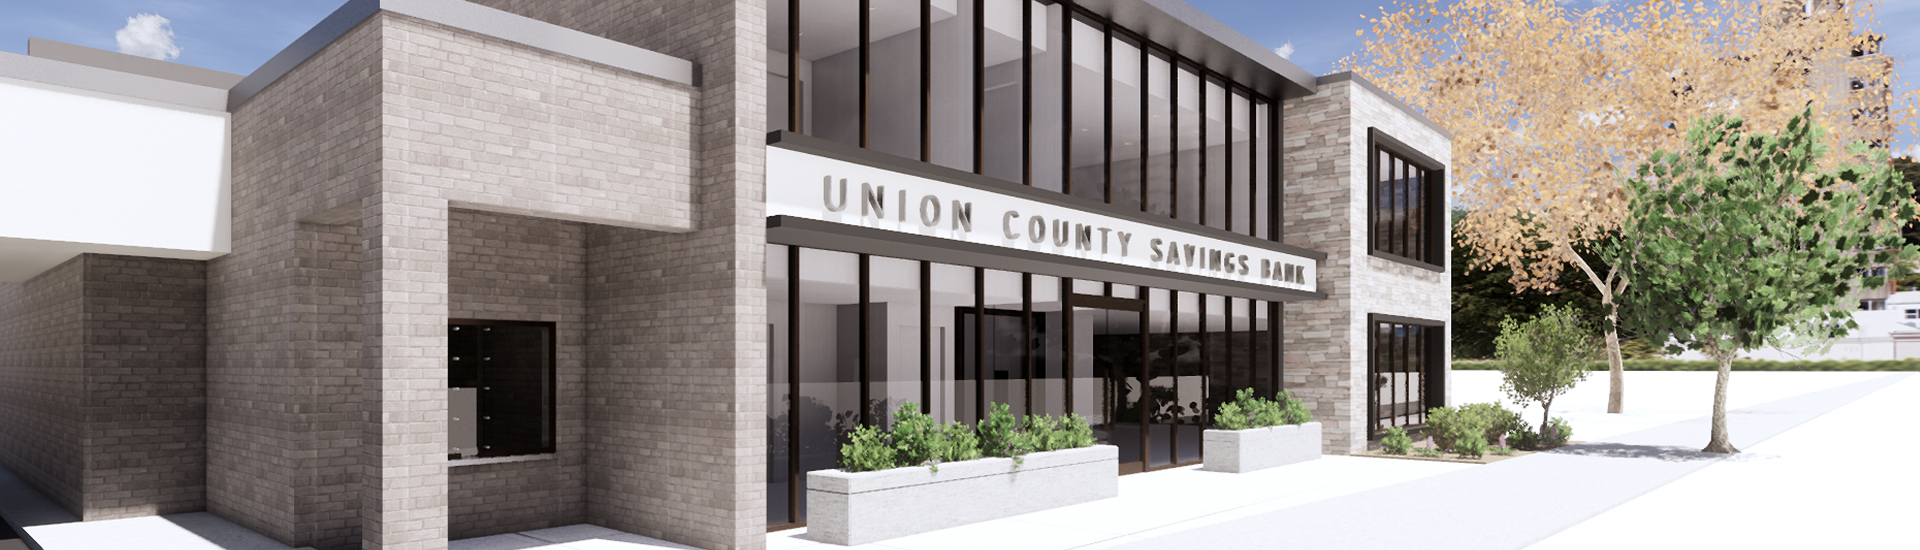 Union County Savings Bank front of the building